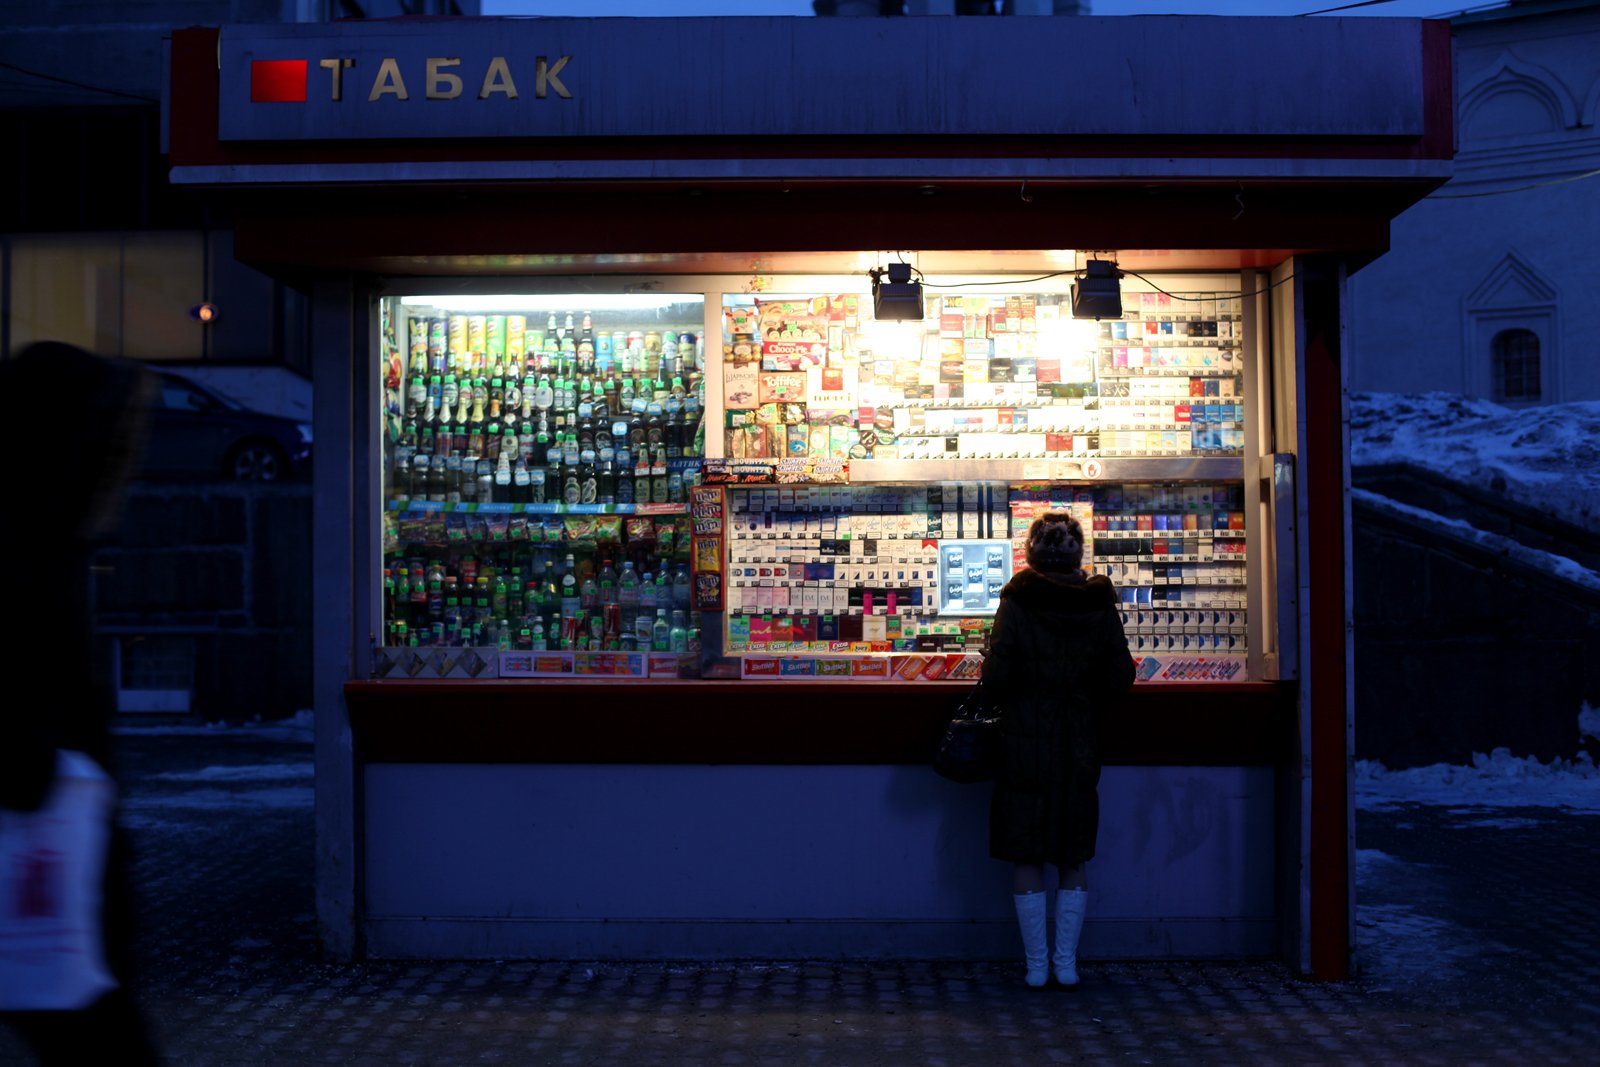   A sidewalk shop selling cigarettes, alcohol, and snacks, Moscow, Russia  